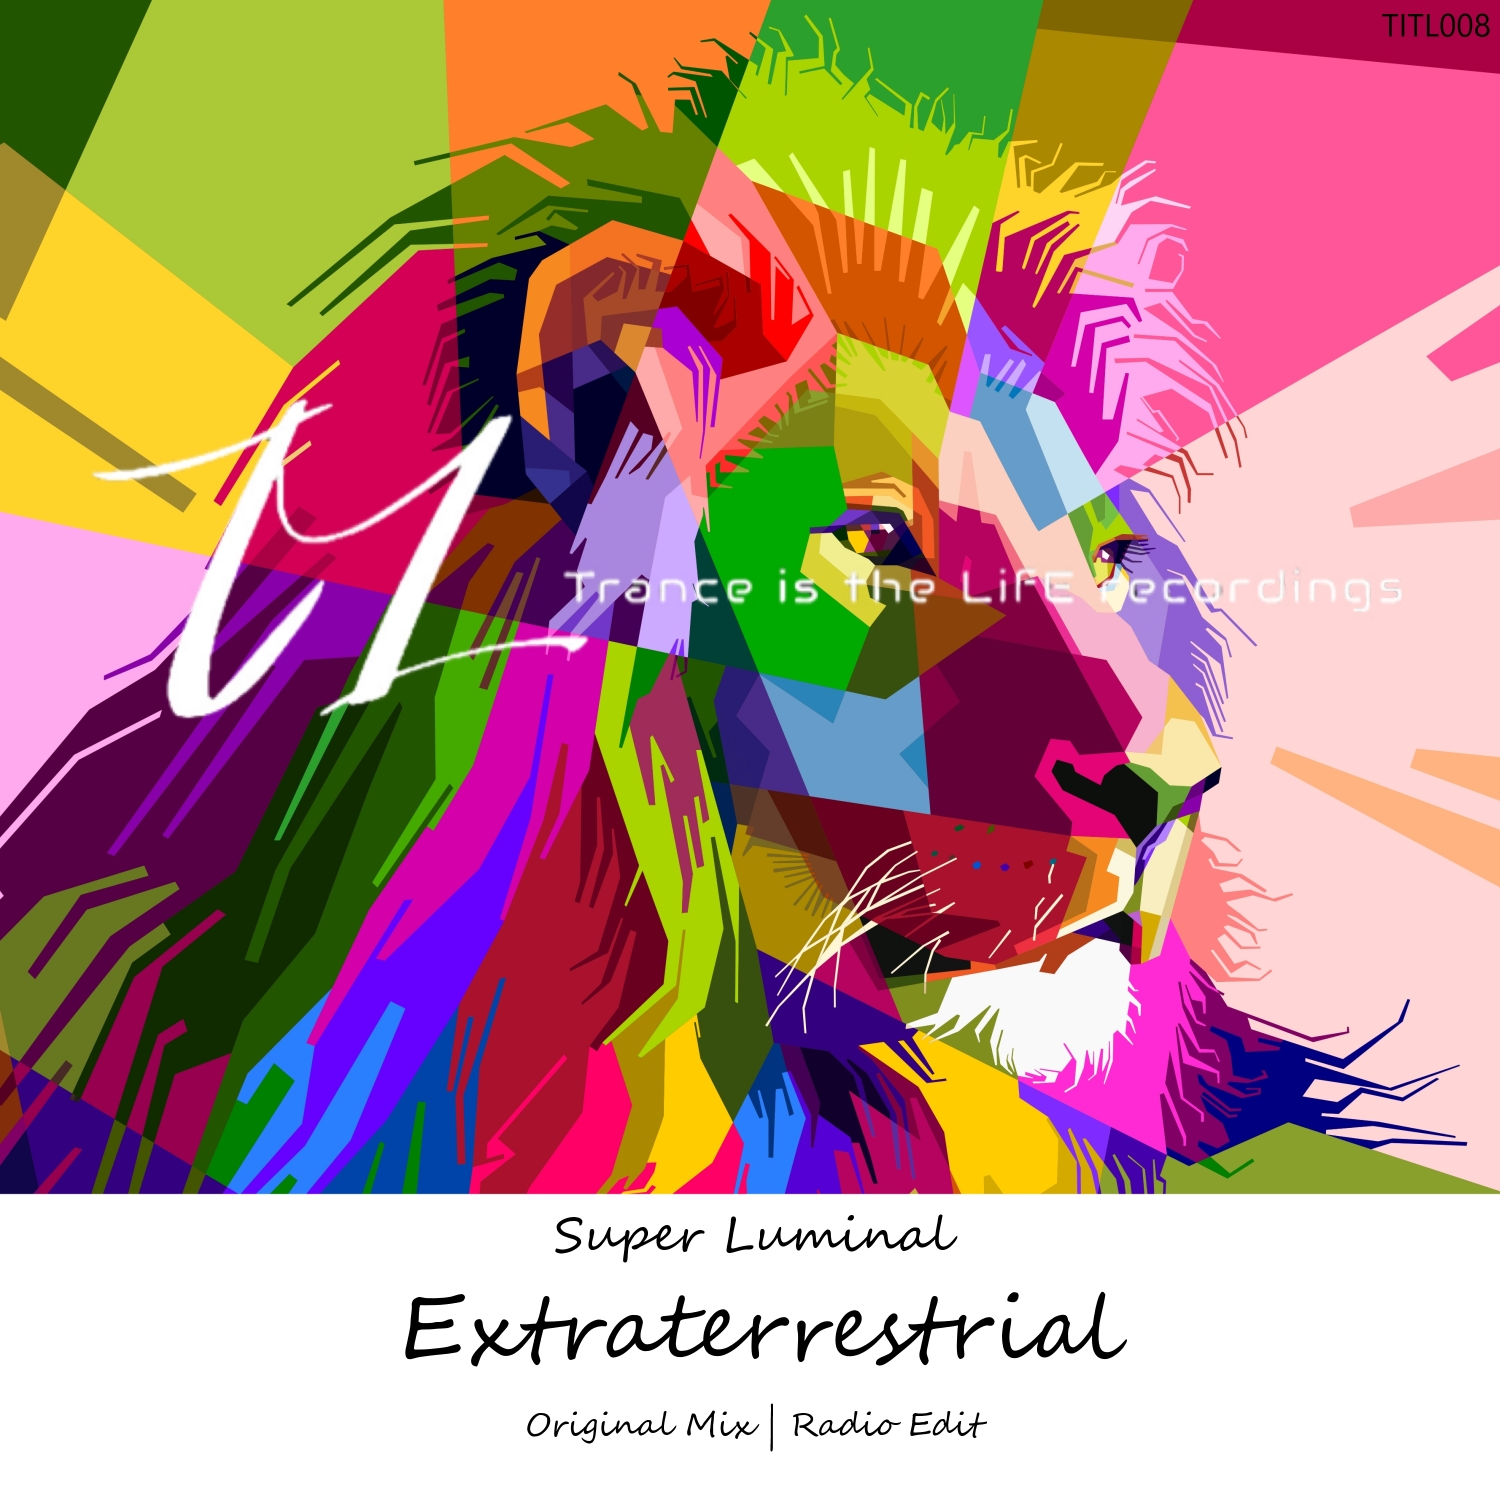 Super Luminal presents Extraterrestrial on Trance Is The Life Recordings